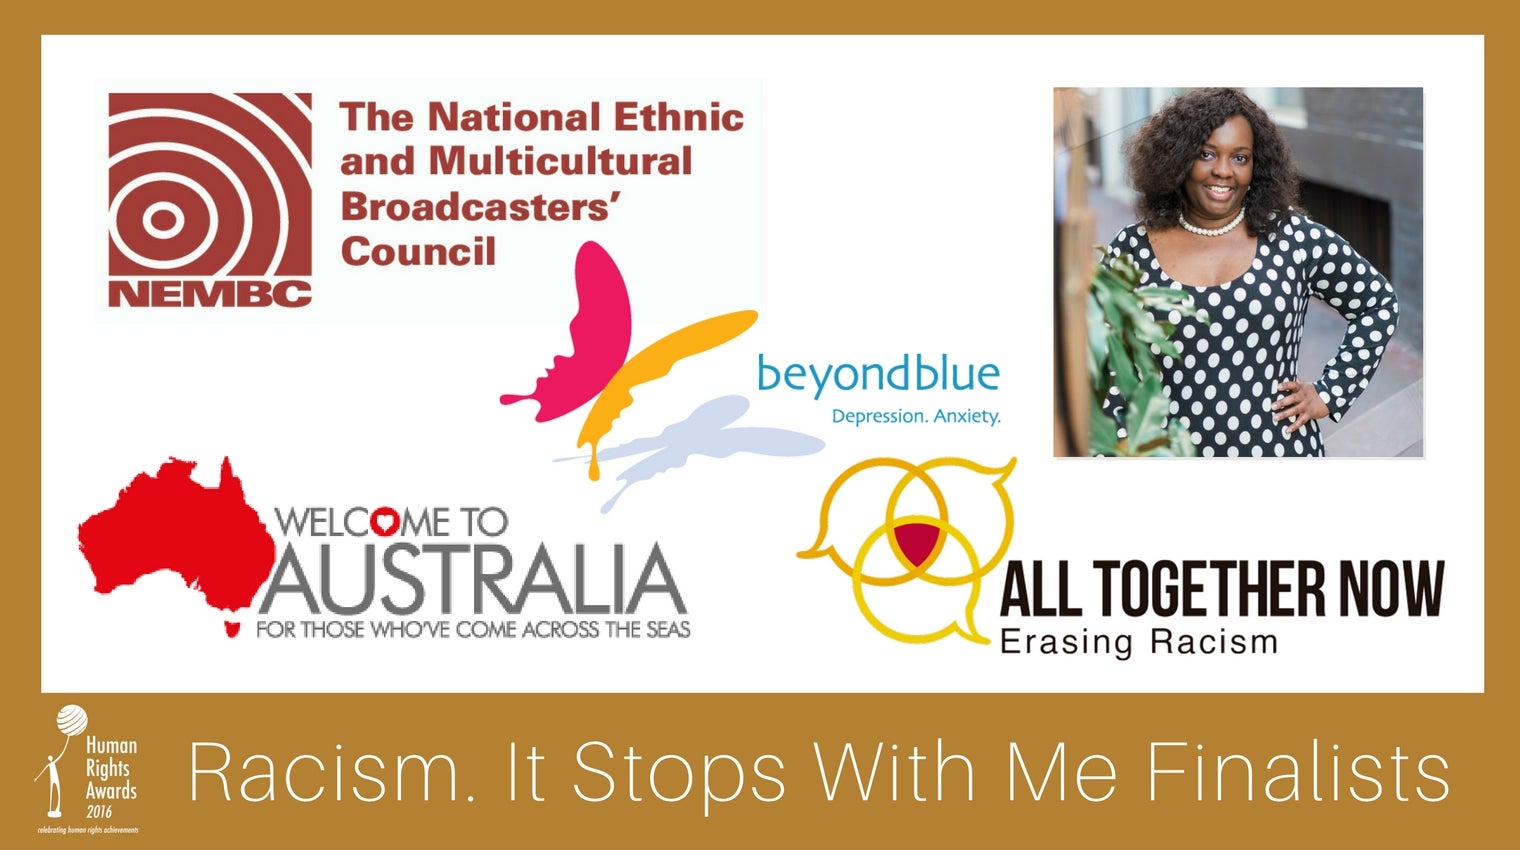 Composite Racism It Stops With Me Award finalists 2016